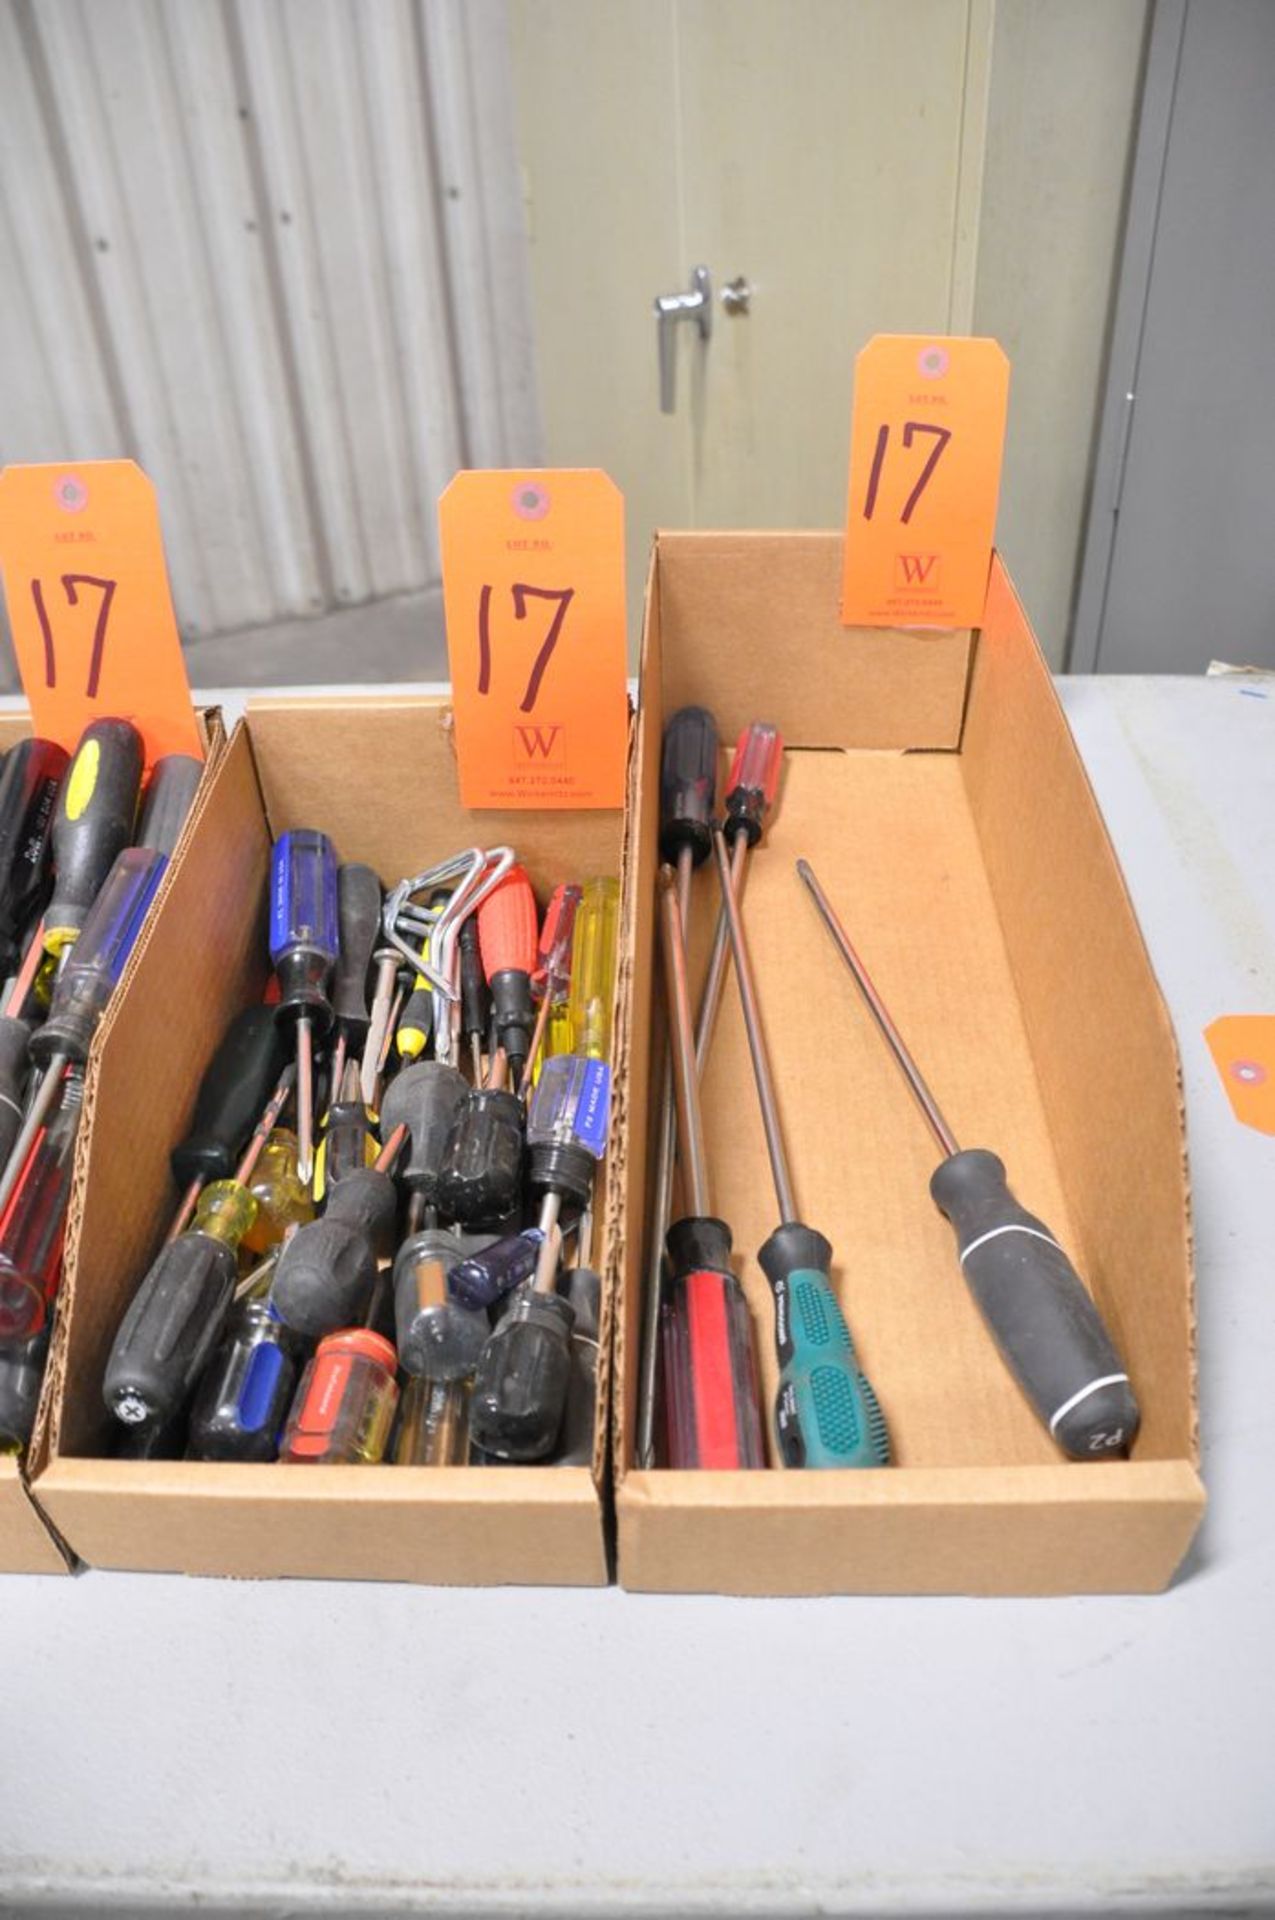 Lot - Phillips Head Screwdrivers, in (4) Boxes - Image 2 of 3